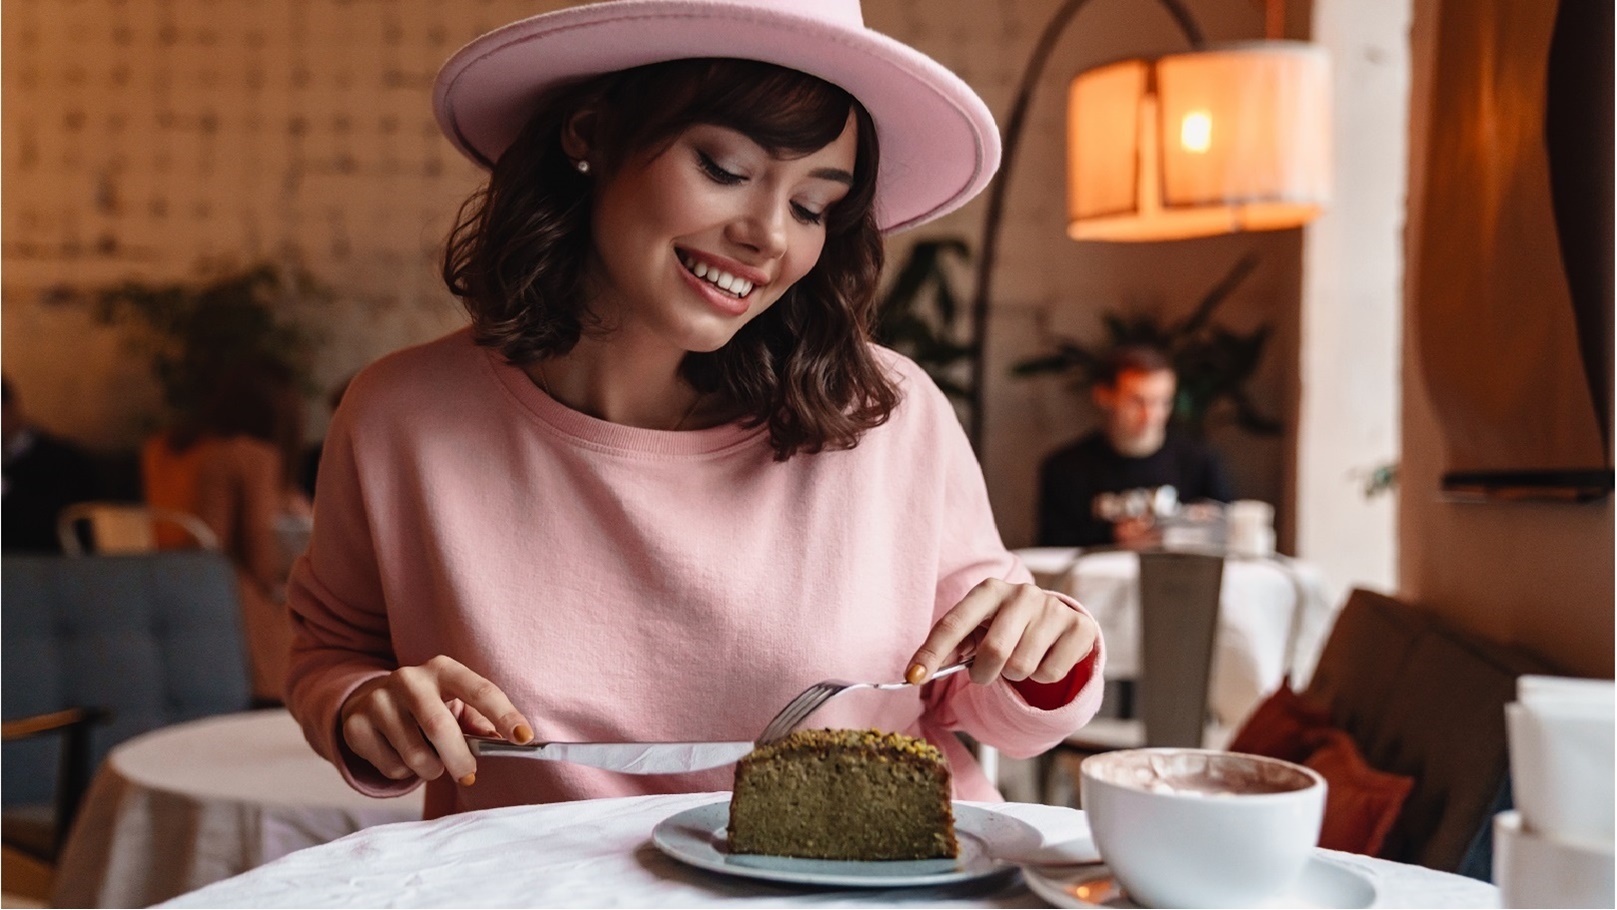 cheerful-positive-woman-indoors-in-cafe-eat-cake-2021-08-27-23-59-13-utc - Copy